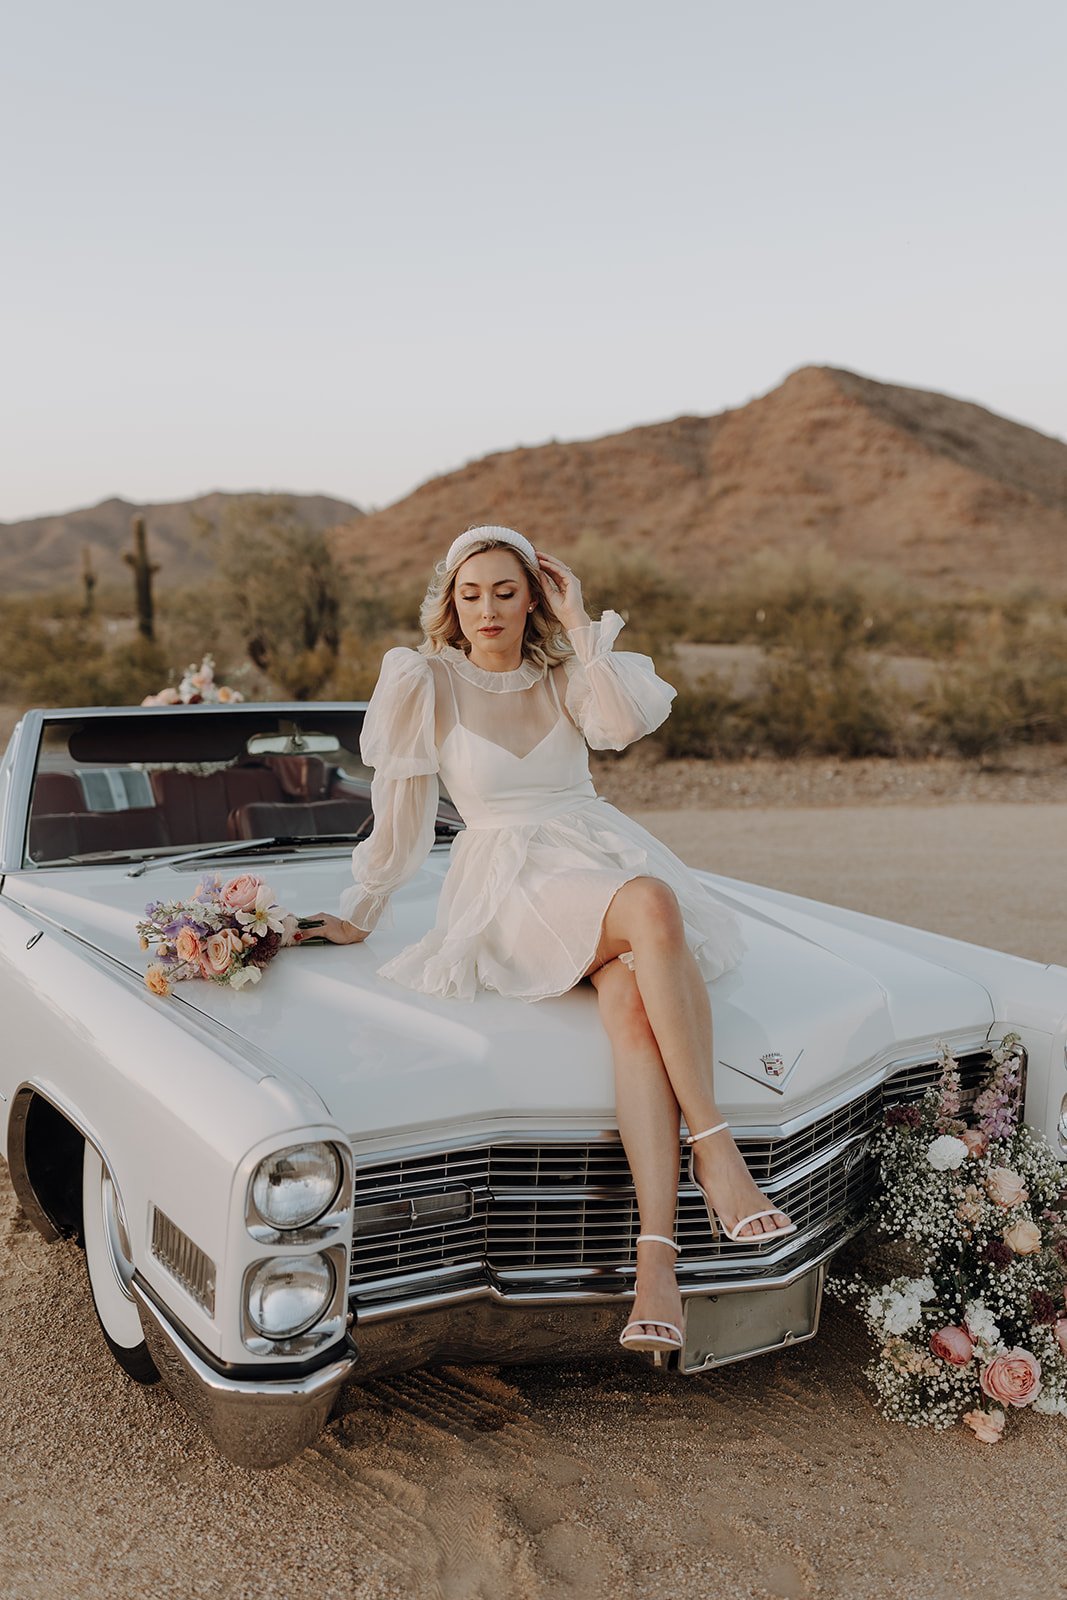 Vintage Wedding Styled Shoot with Convertible Getaway Car